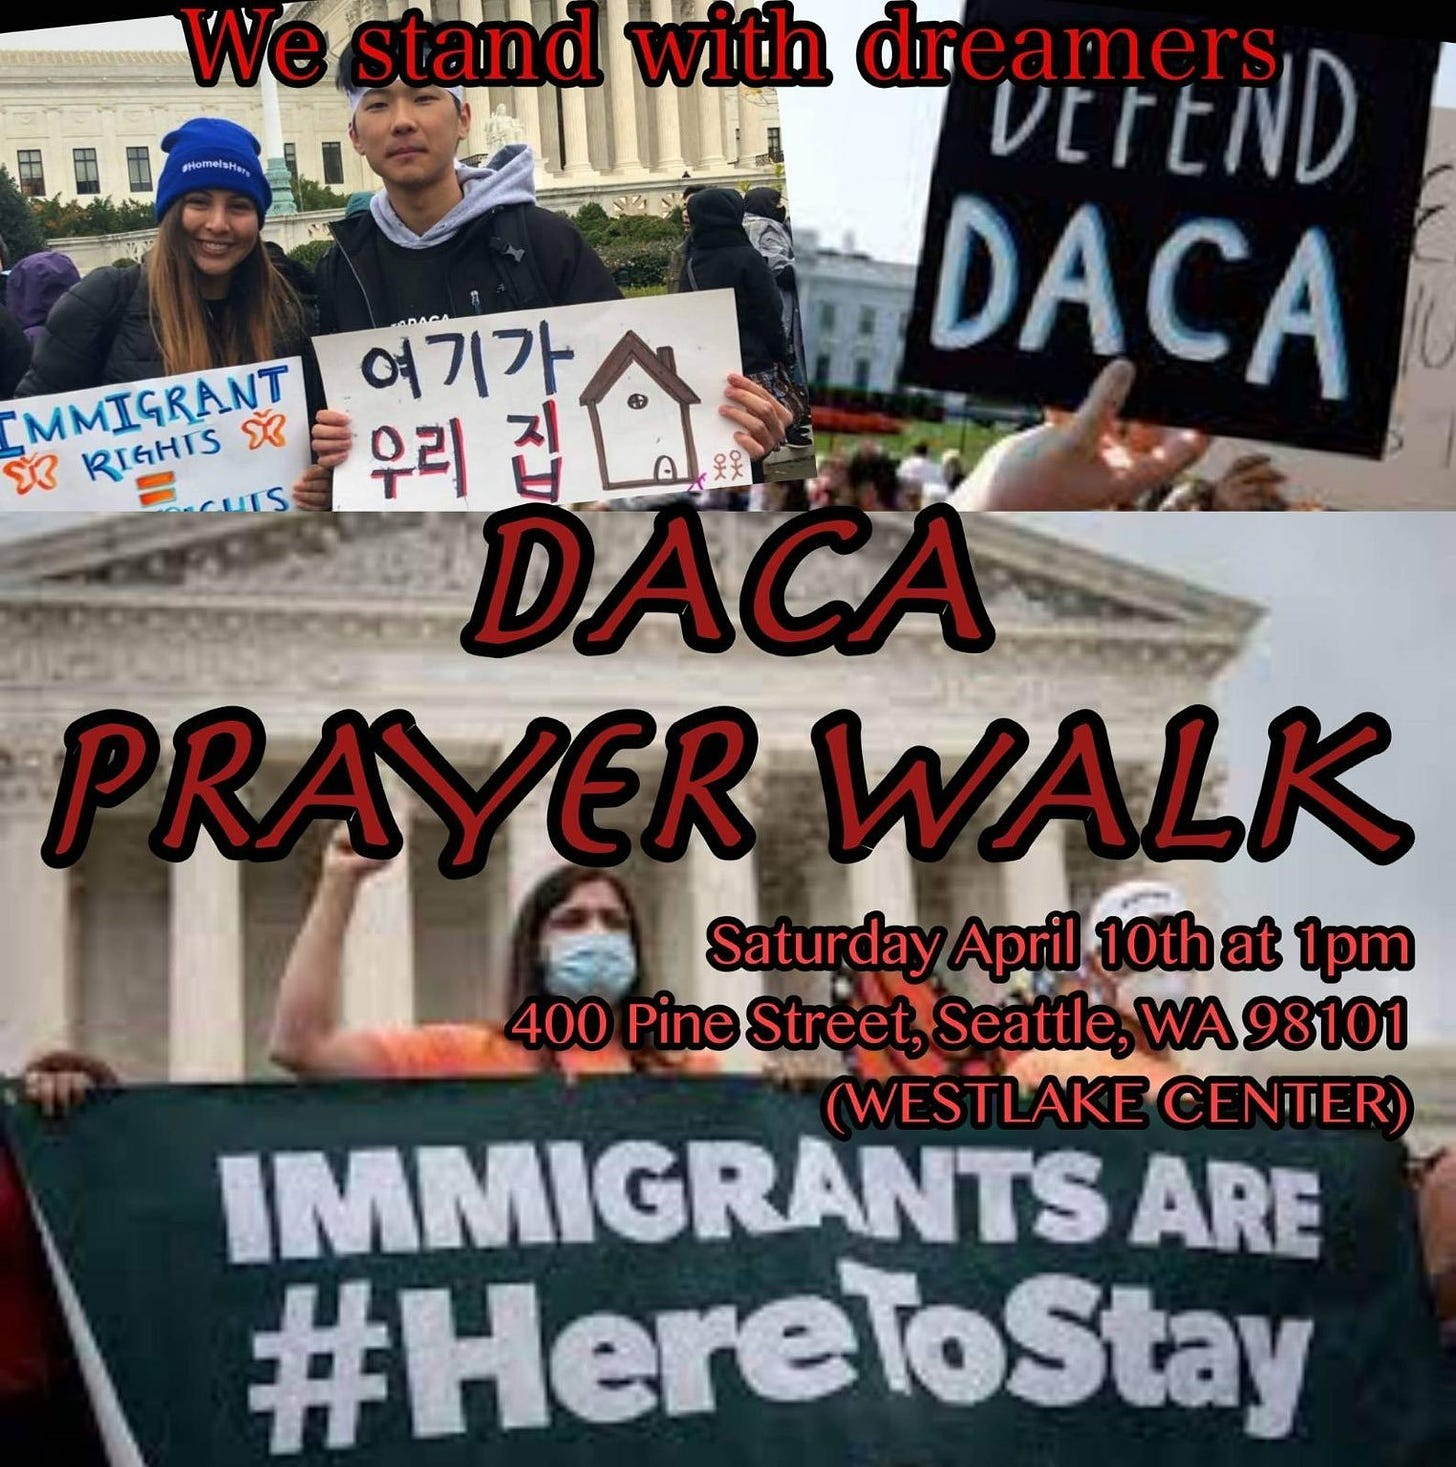 We stand with dreamers. DACA prayer walk Saturday April 10th at 1pm at 400 Pine Street, Seattle, WA (Westlake Center) Immigrants are #HereToStay